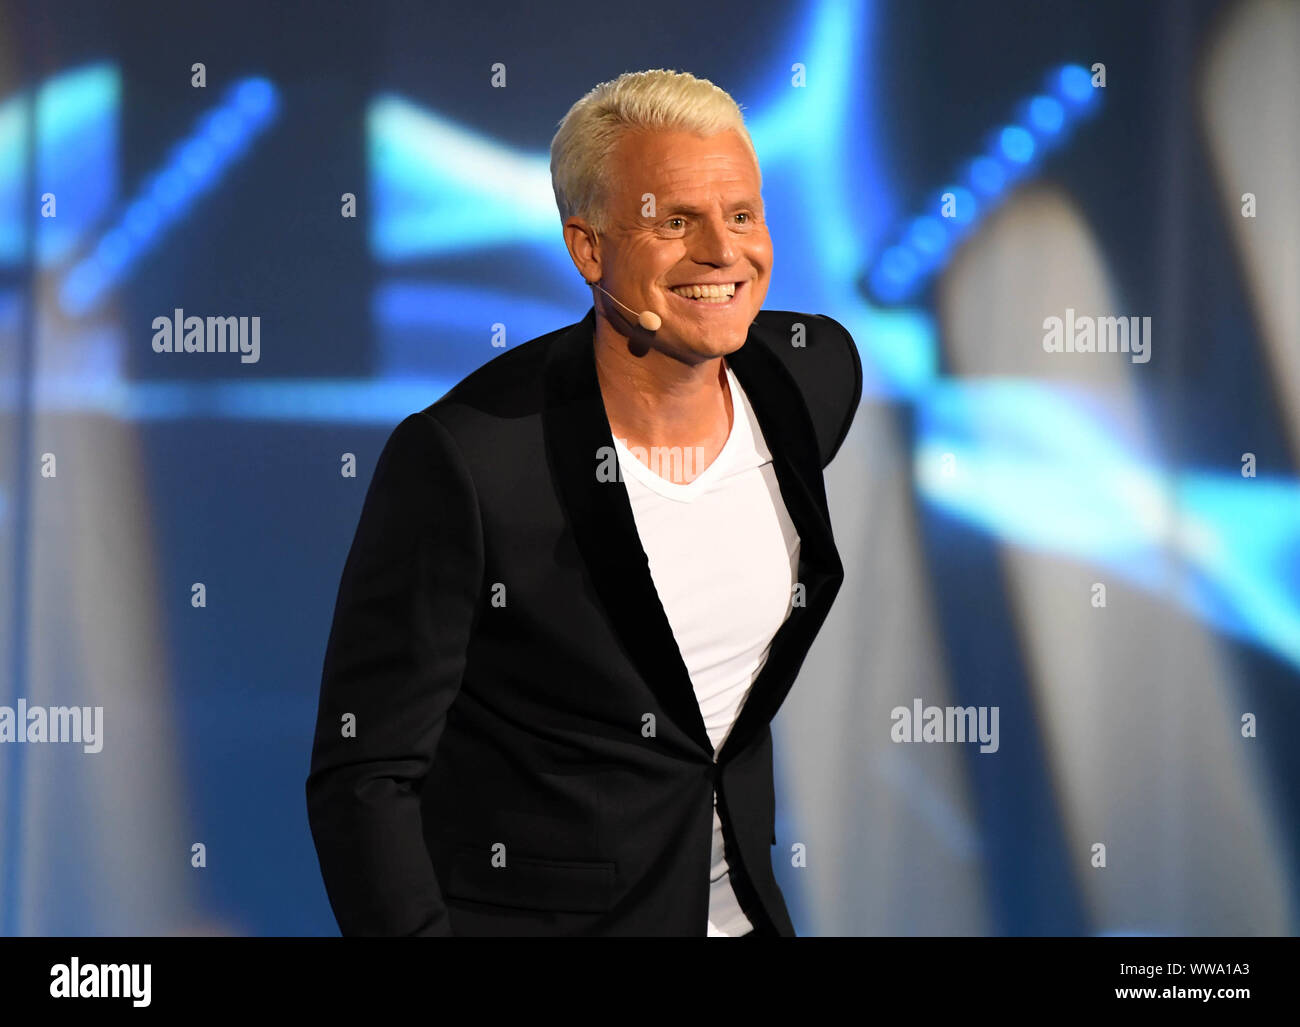 Baden Baden, Germany. 12th Sep, 2019. Guido Cantz moderates the recording of the TV show 'SWR3 New Pop Festival - the Special' at the Festspielhaus Baden-Baden. Credit: Uli Deck/dpa/Alamy Live News Stock Photo